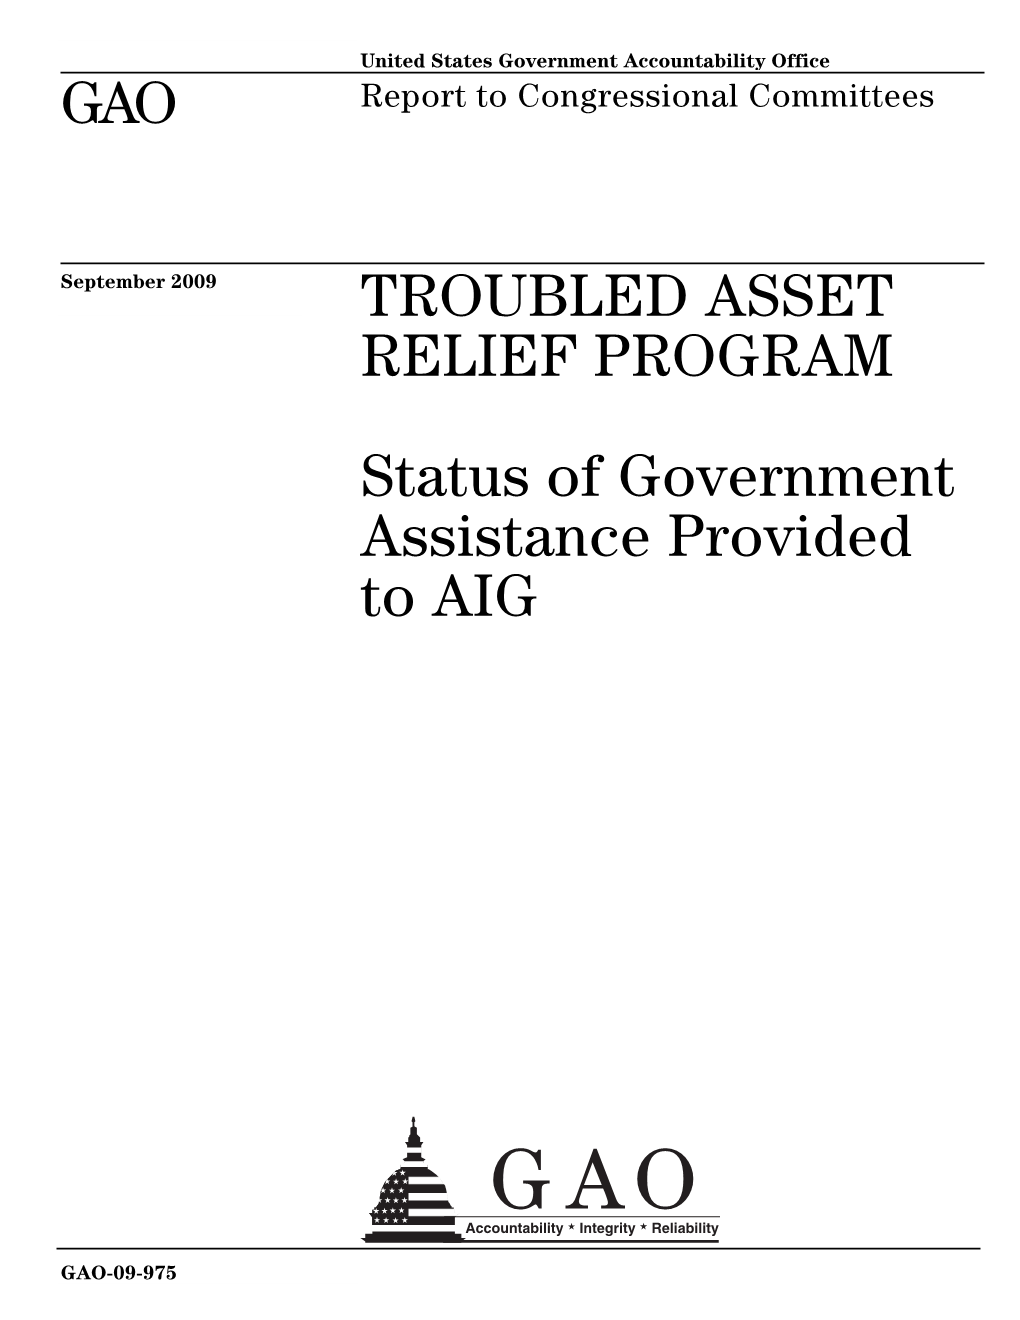 Status of Government Assistance Provided to AIG